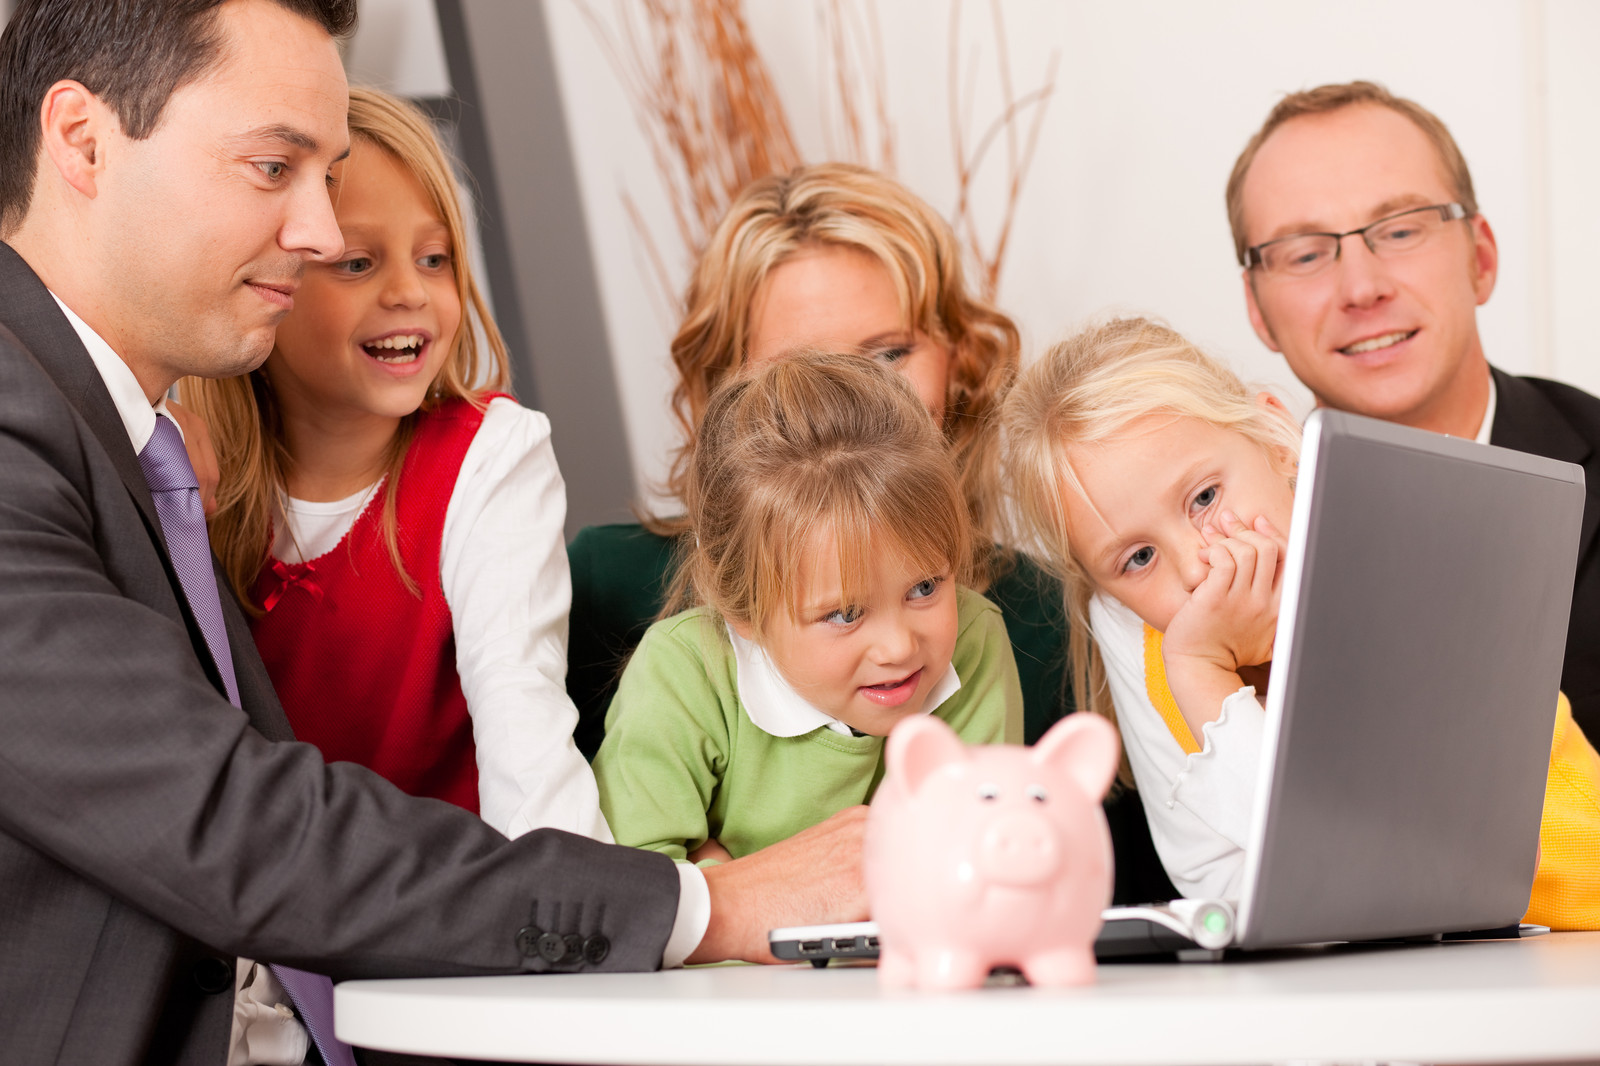 Family around a computer with a piggy bank